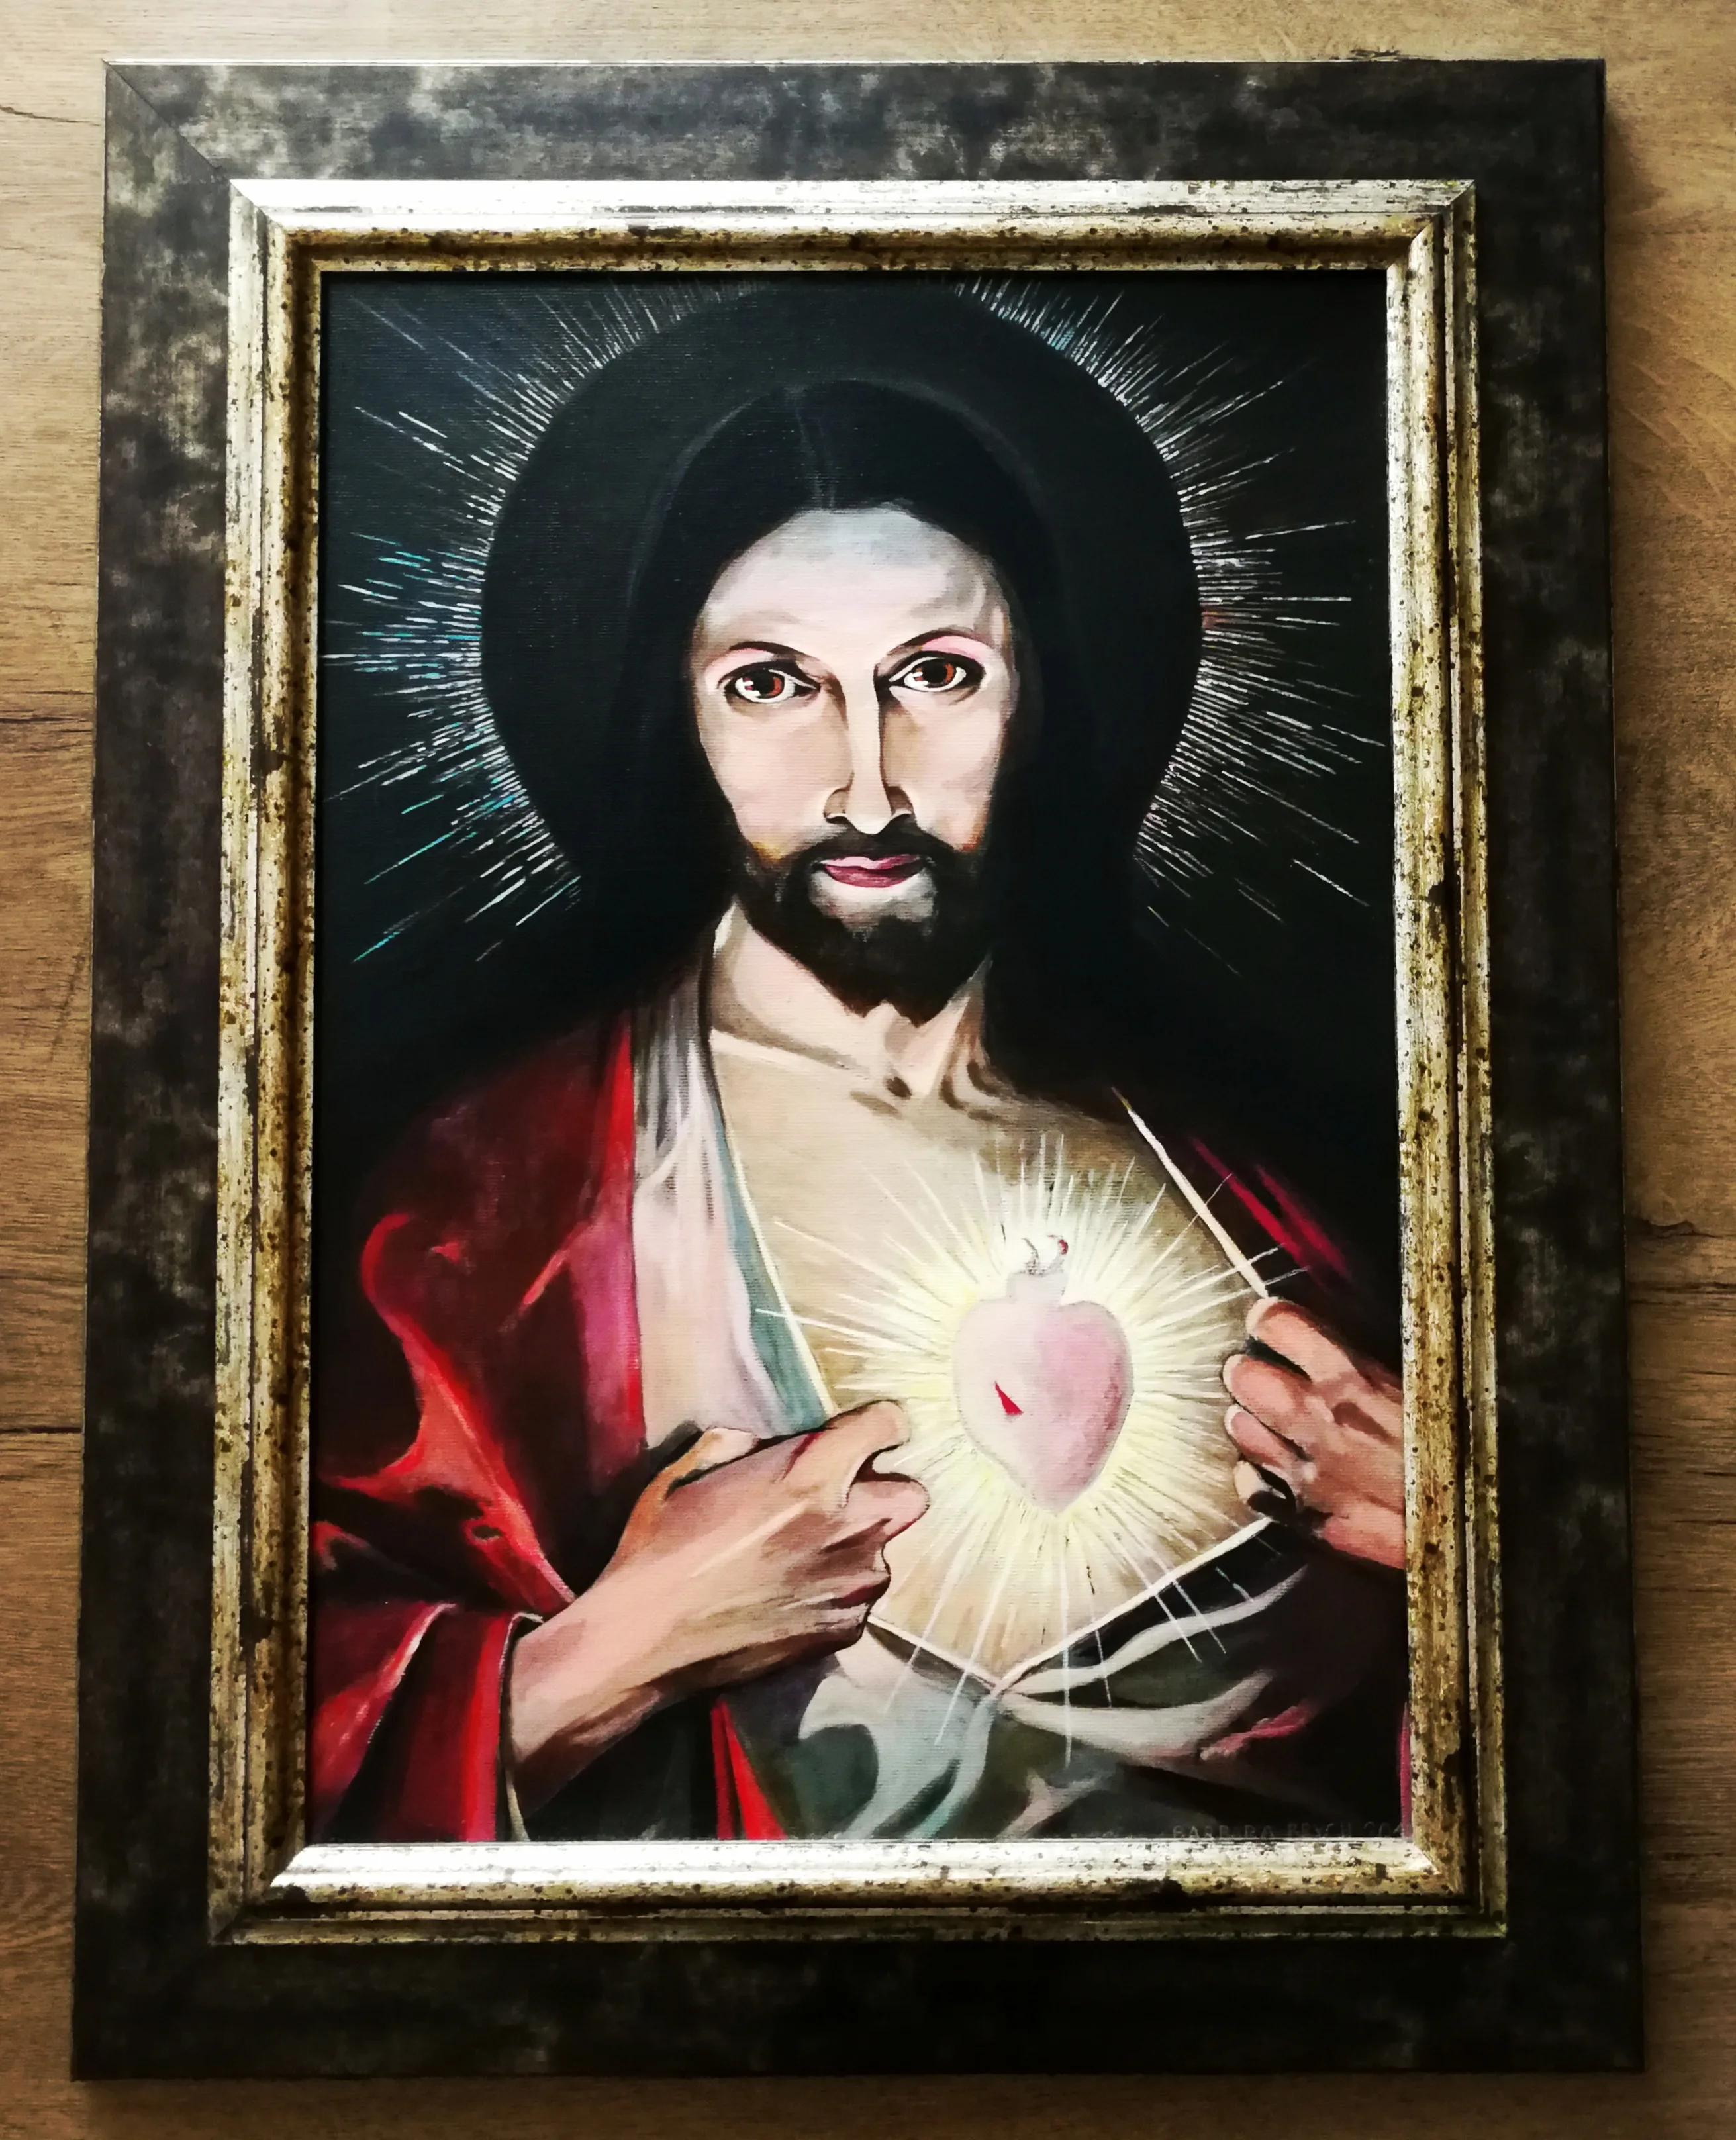 The painting depicting Jesus Christ, measuring 40x55 cm, made using oil on canvas technique